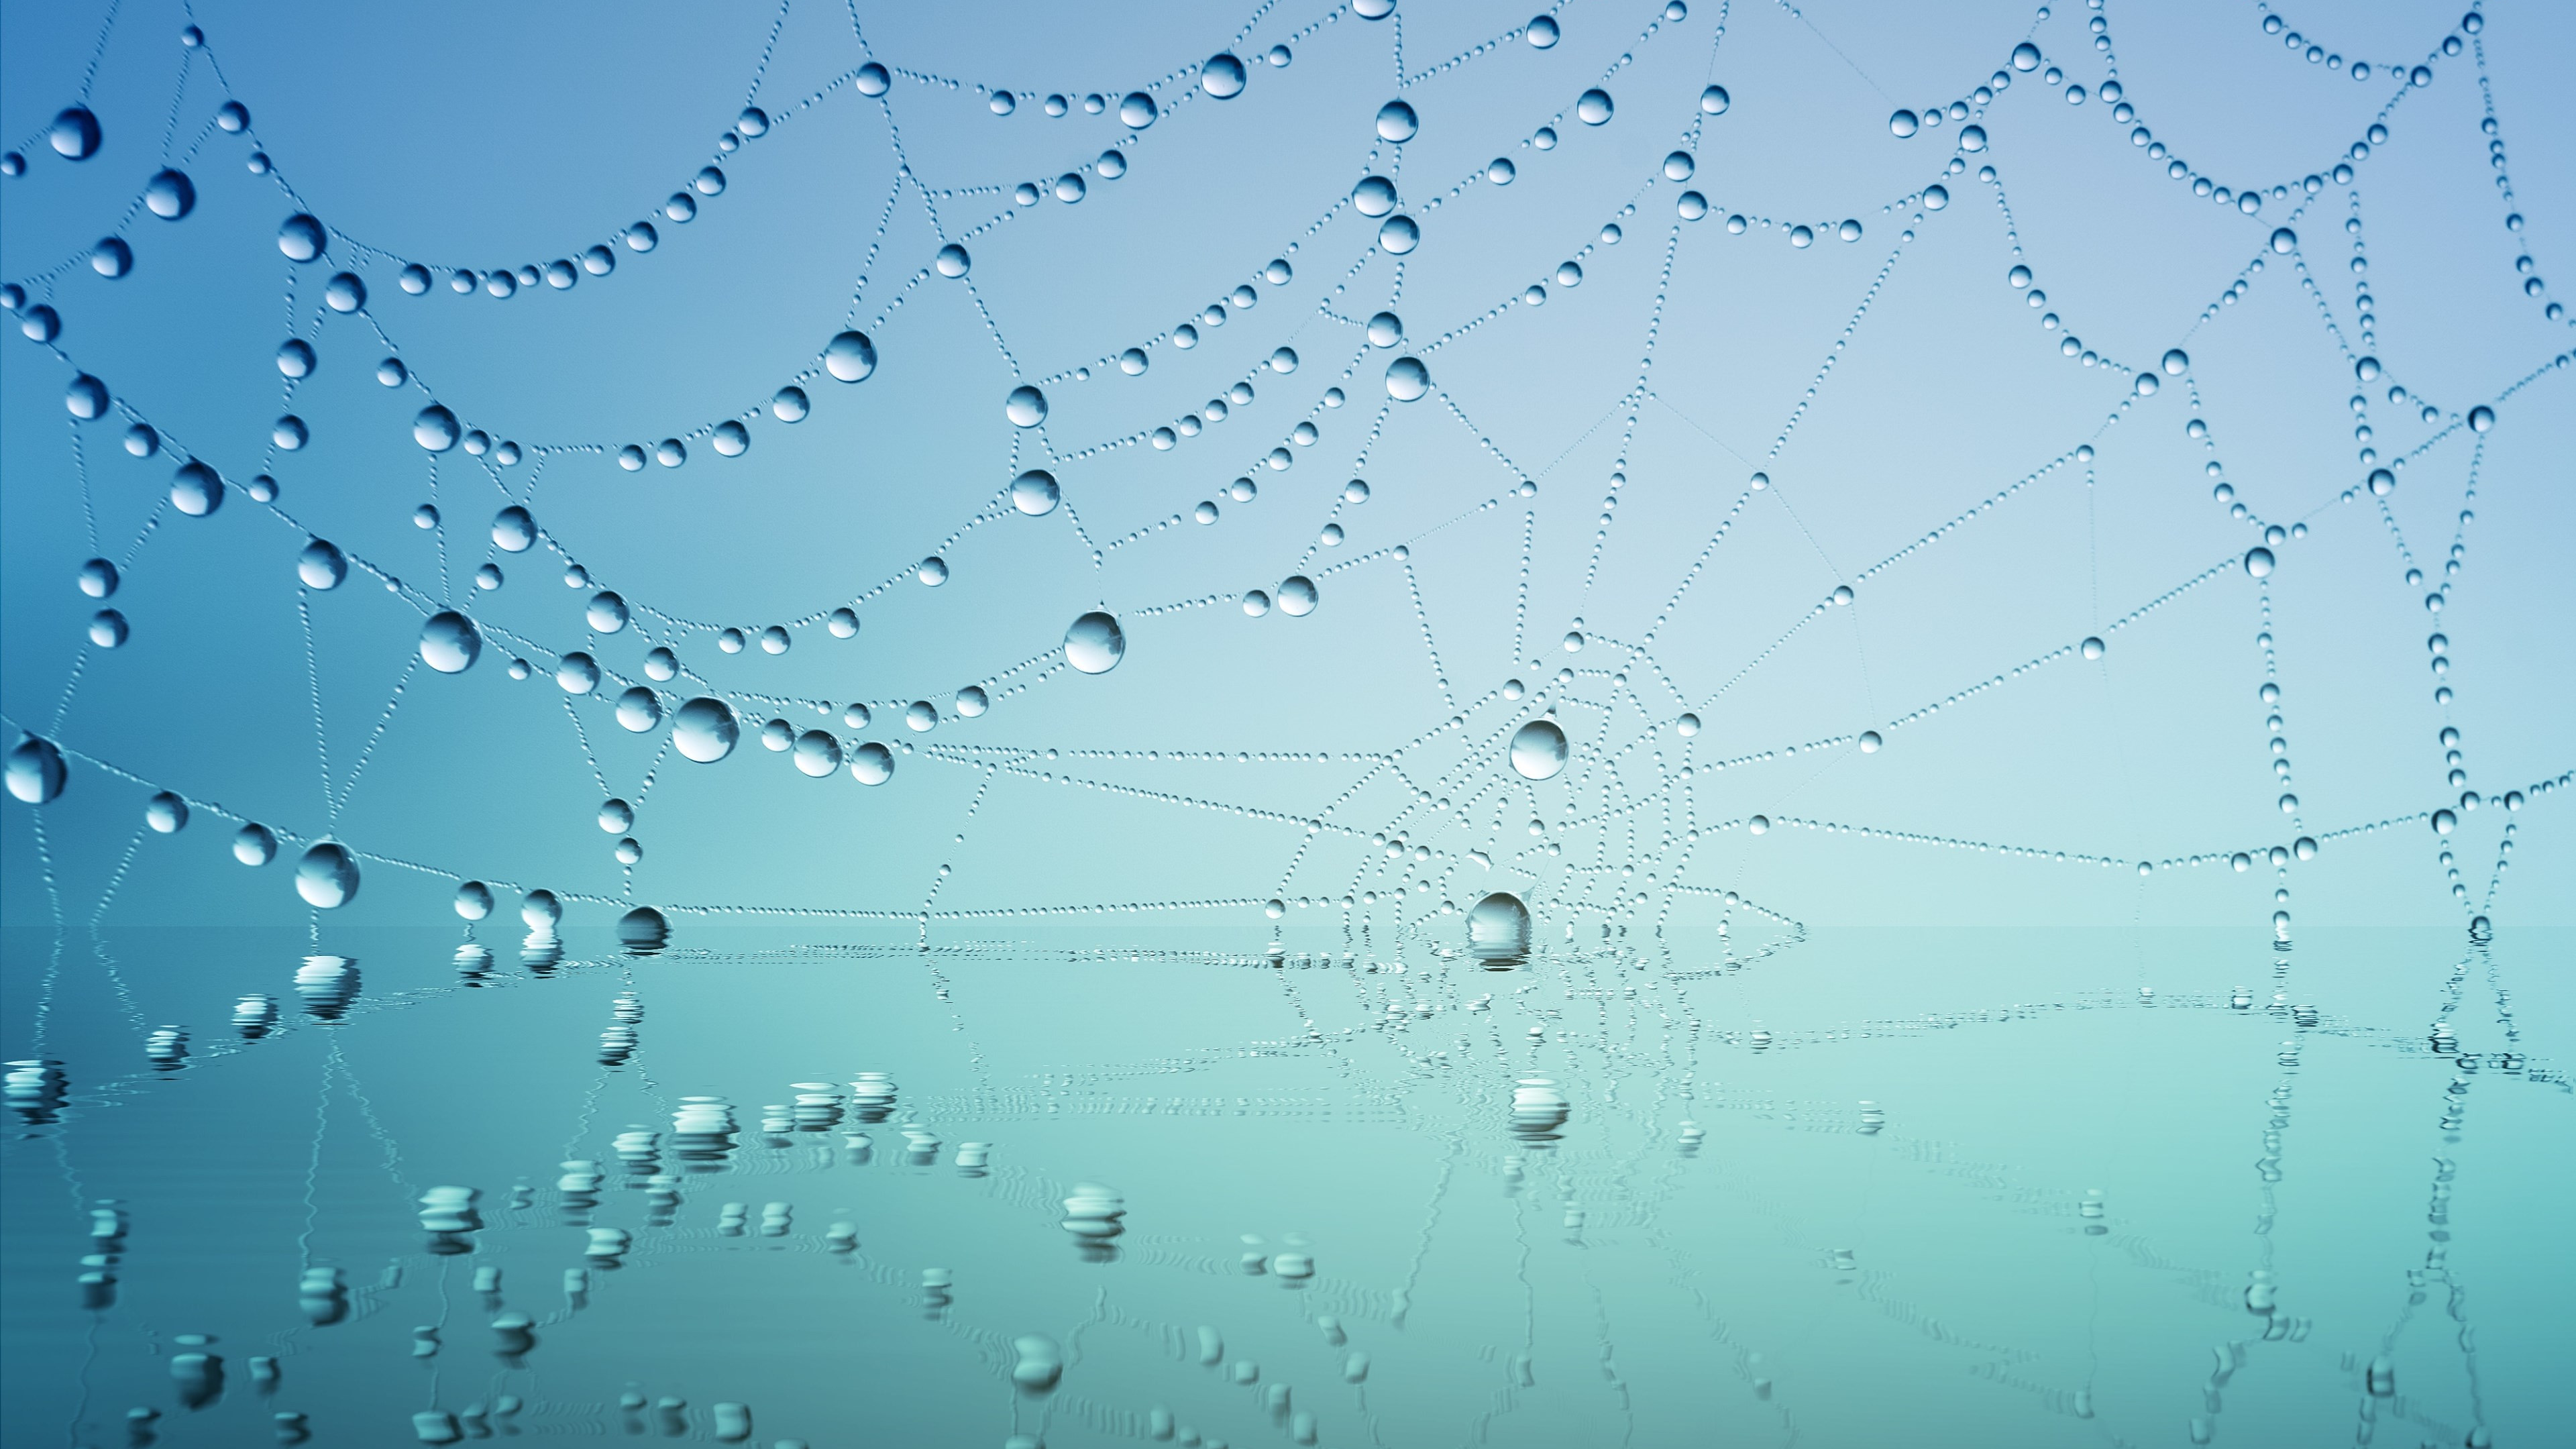 Dew drops on the spider web wallpaper 3840x2160